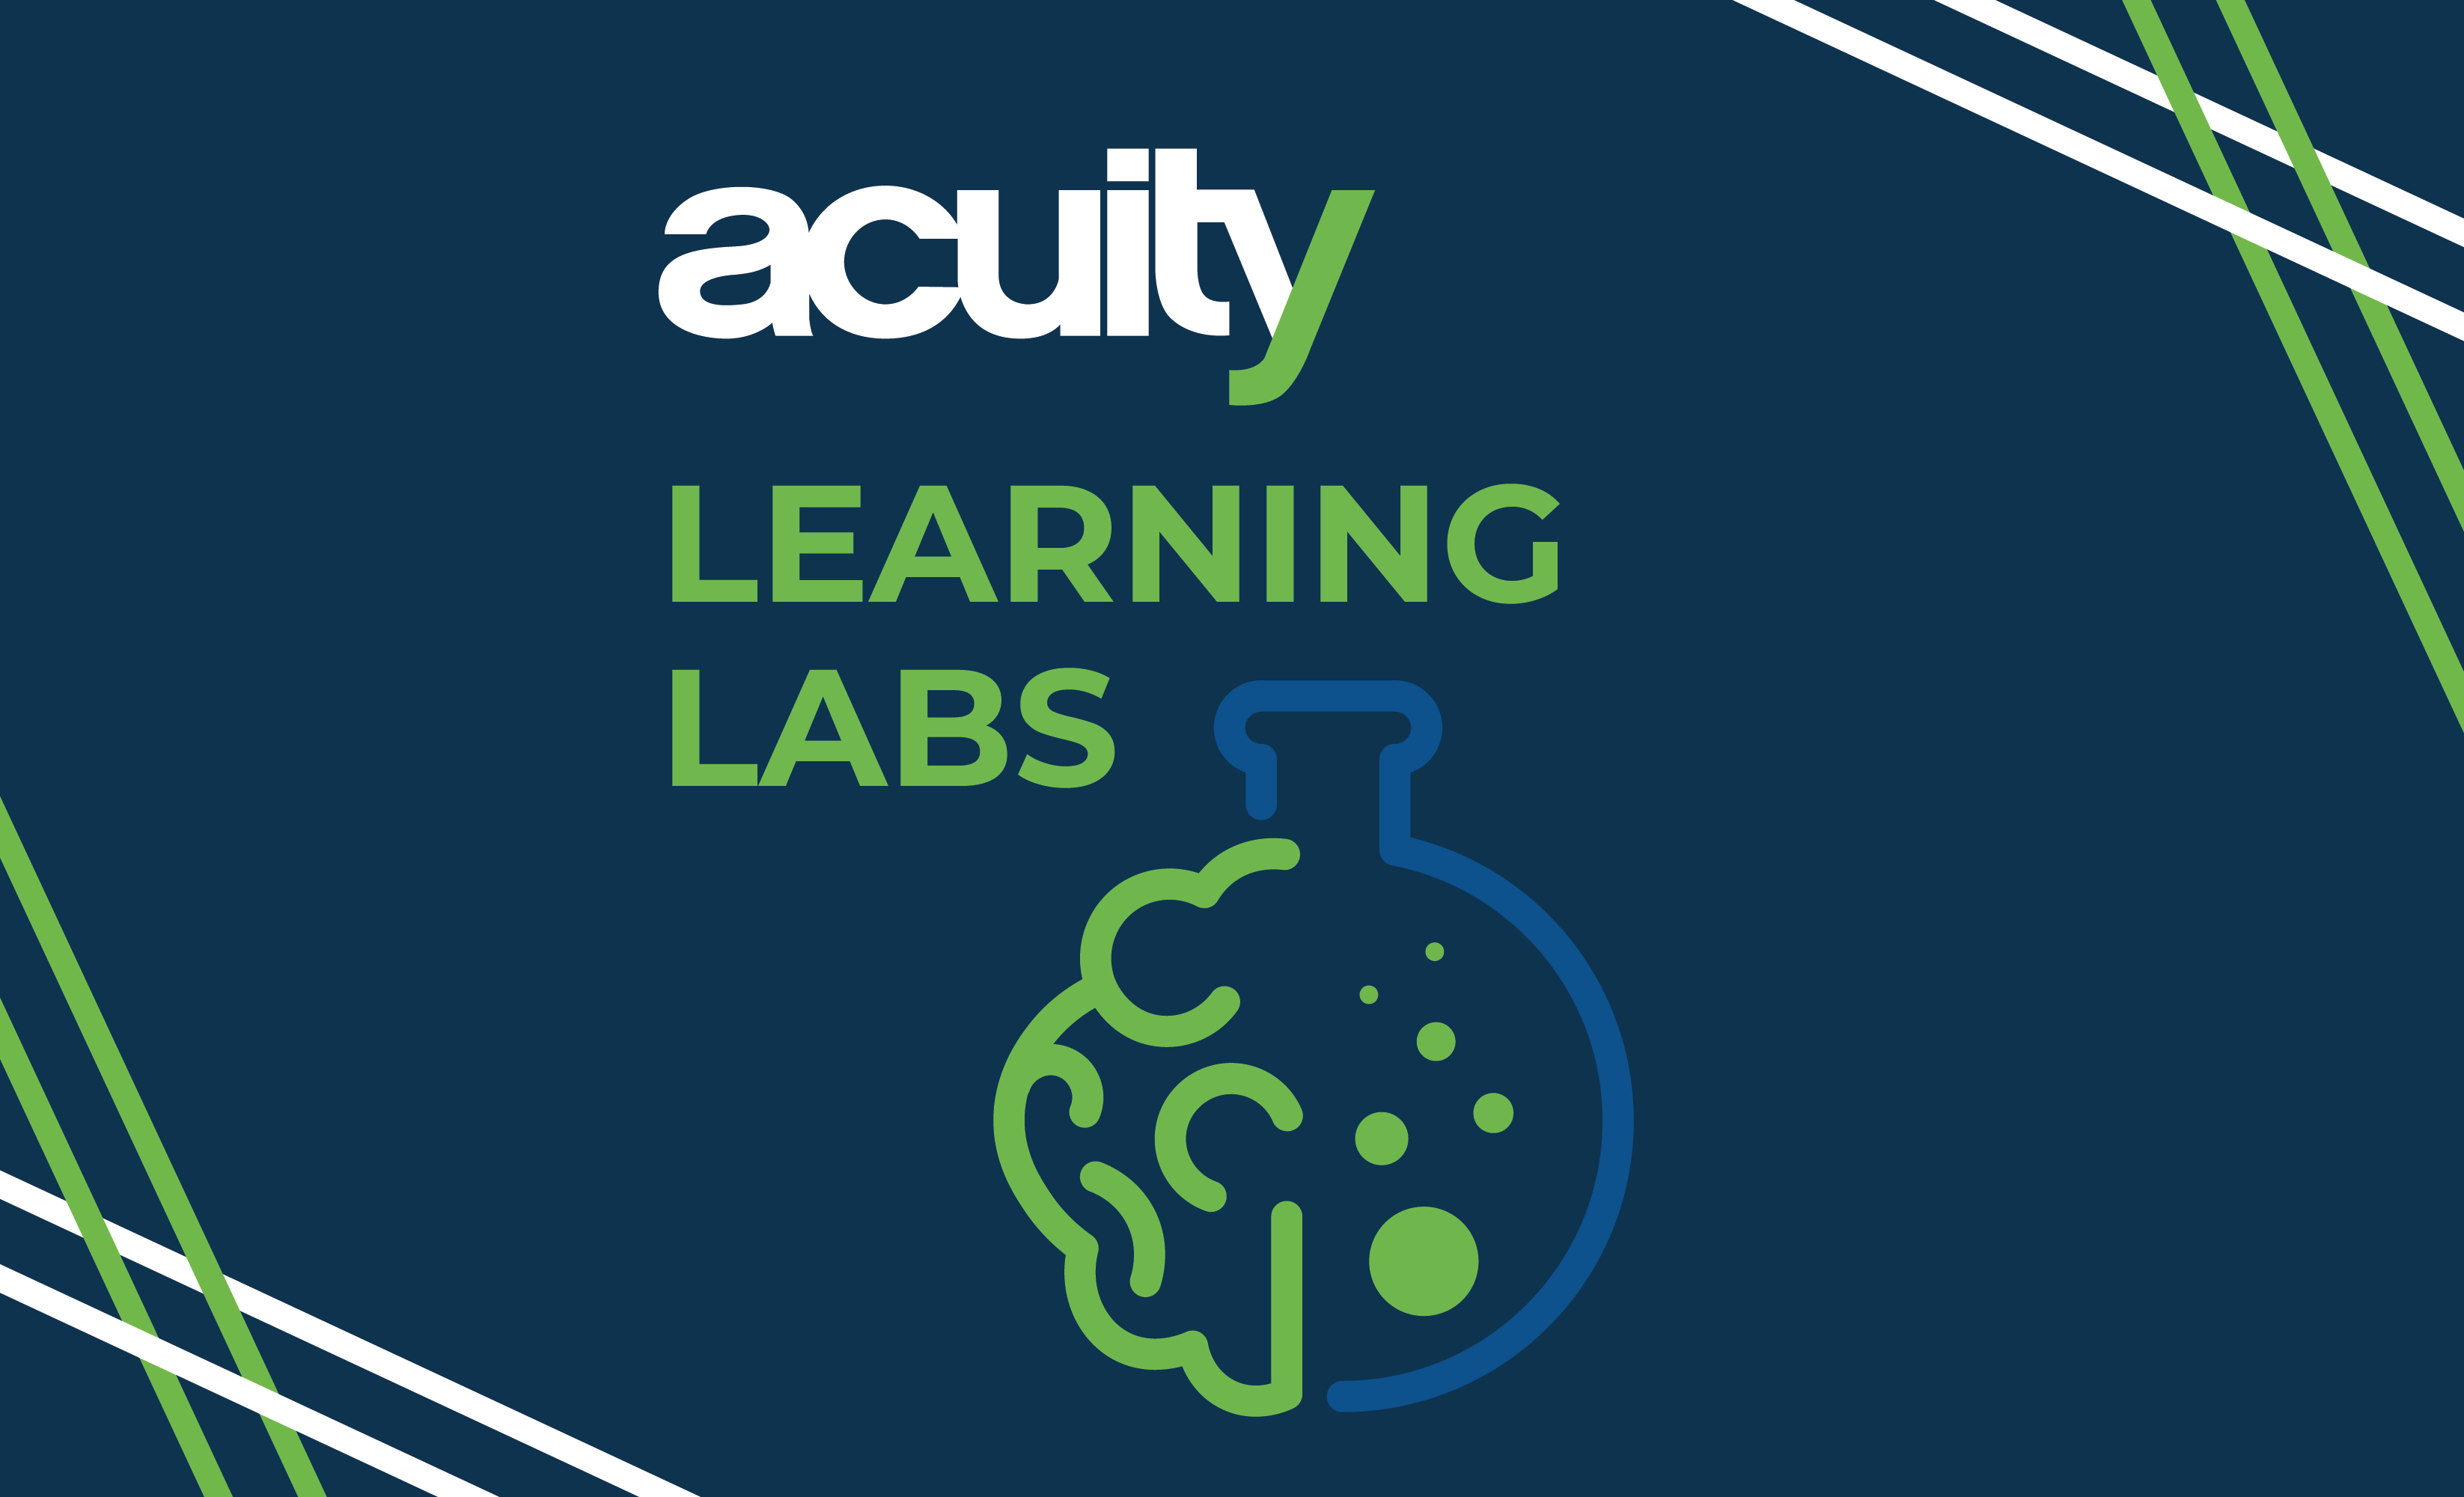 Acuity Learning Labs